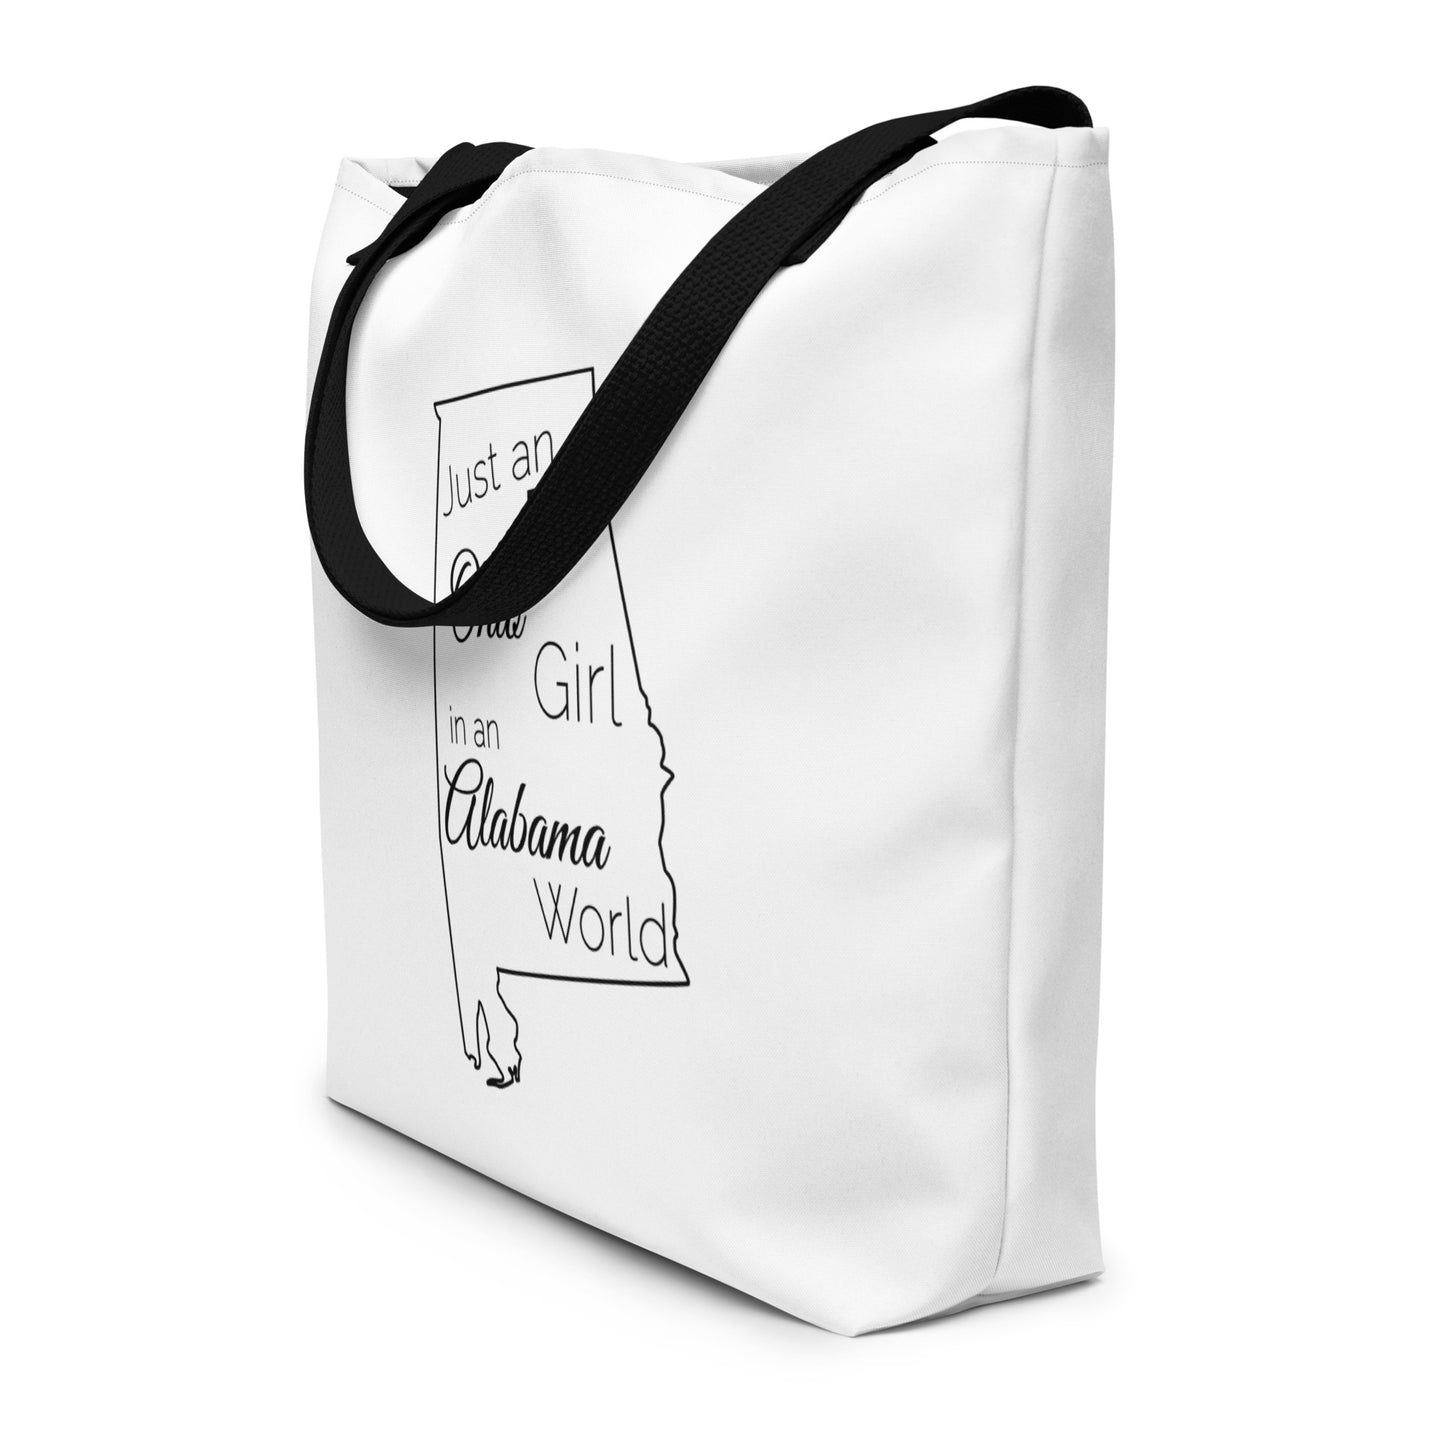 Just an Ohio Girl in an Alabama World Large Tote Bag